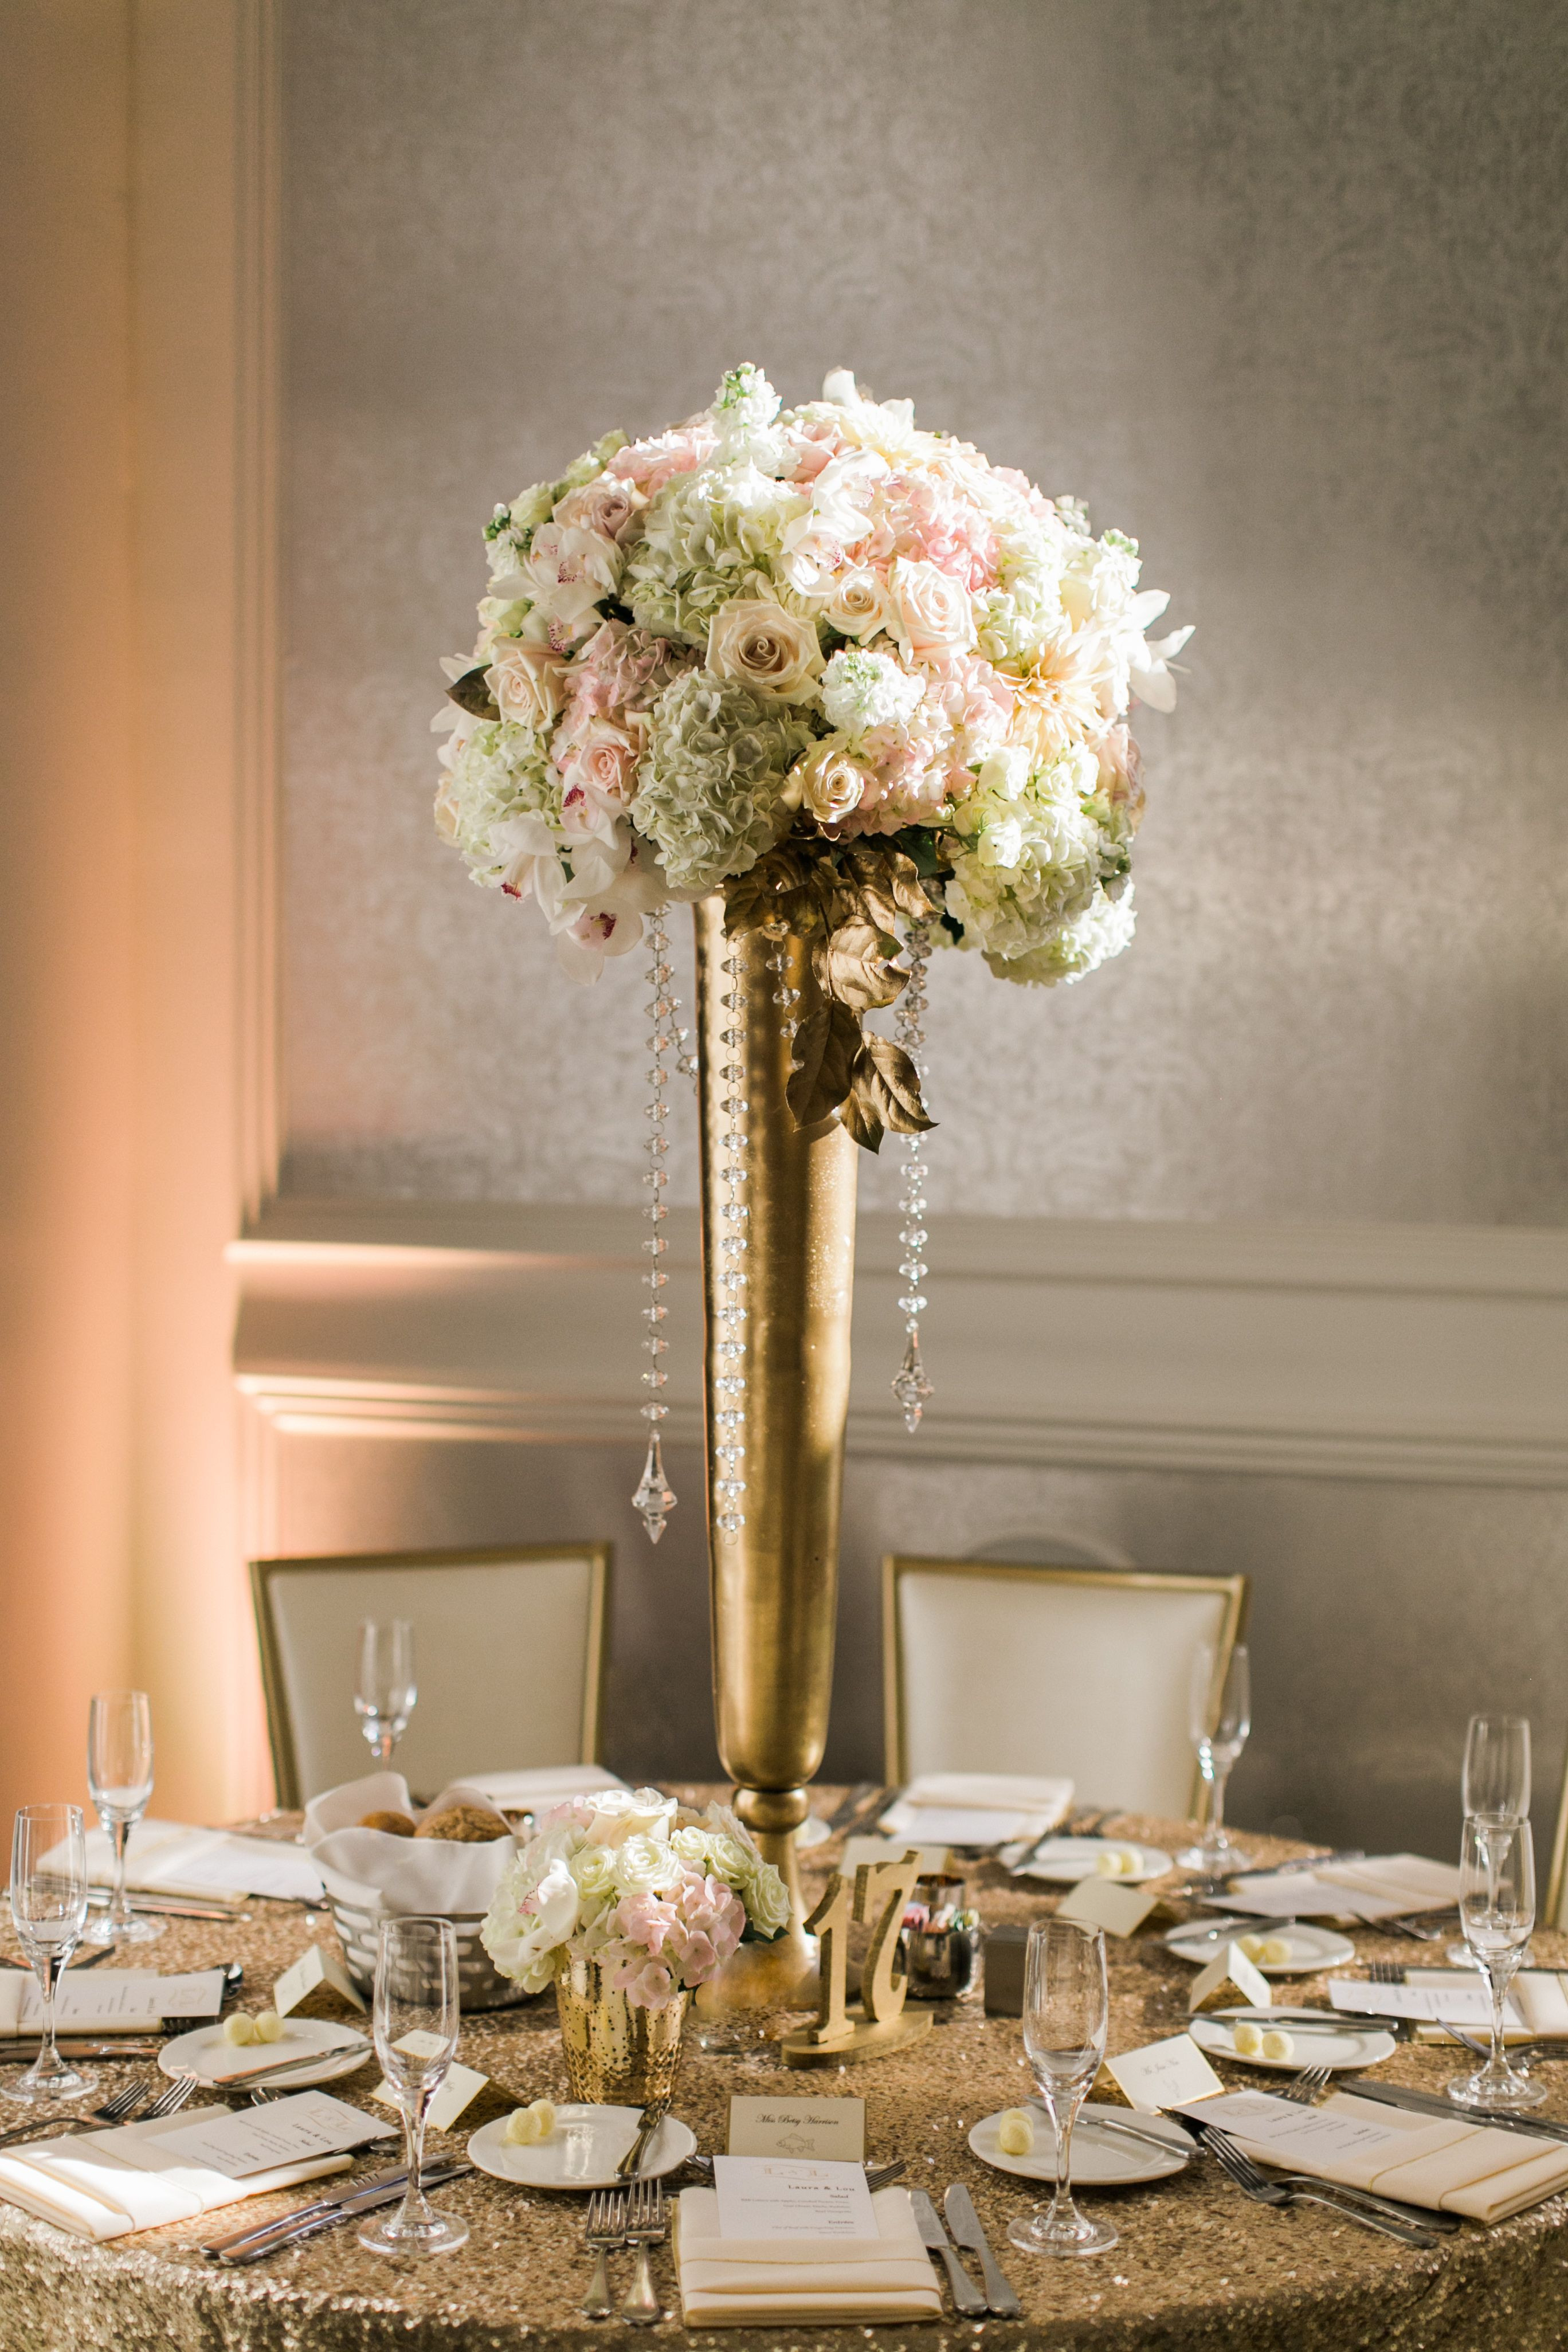 27 attractive Gold Bowl Vase 2024 free download gold bowl vase of sweet looking tall vase centerpiece party decorations surprising throughout extraordinary tall vase centerpiece gold bridal ideas pinterest scheme of arrangements centerpie